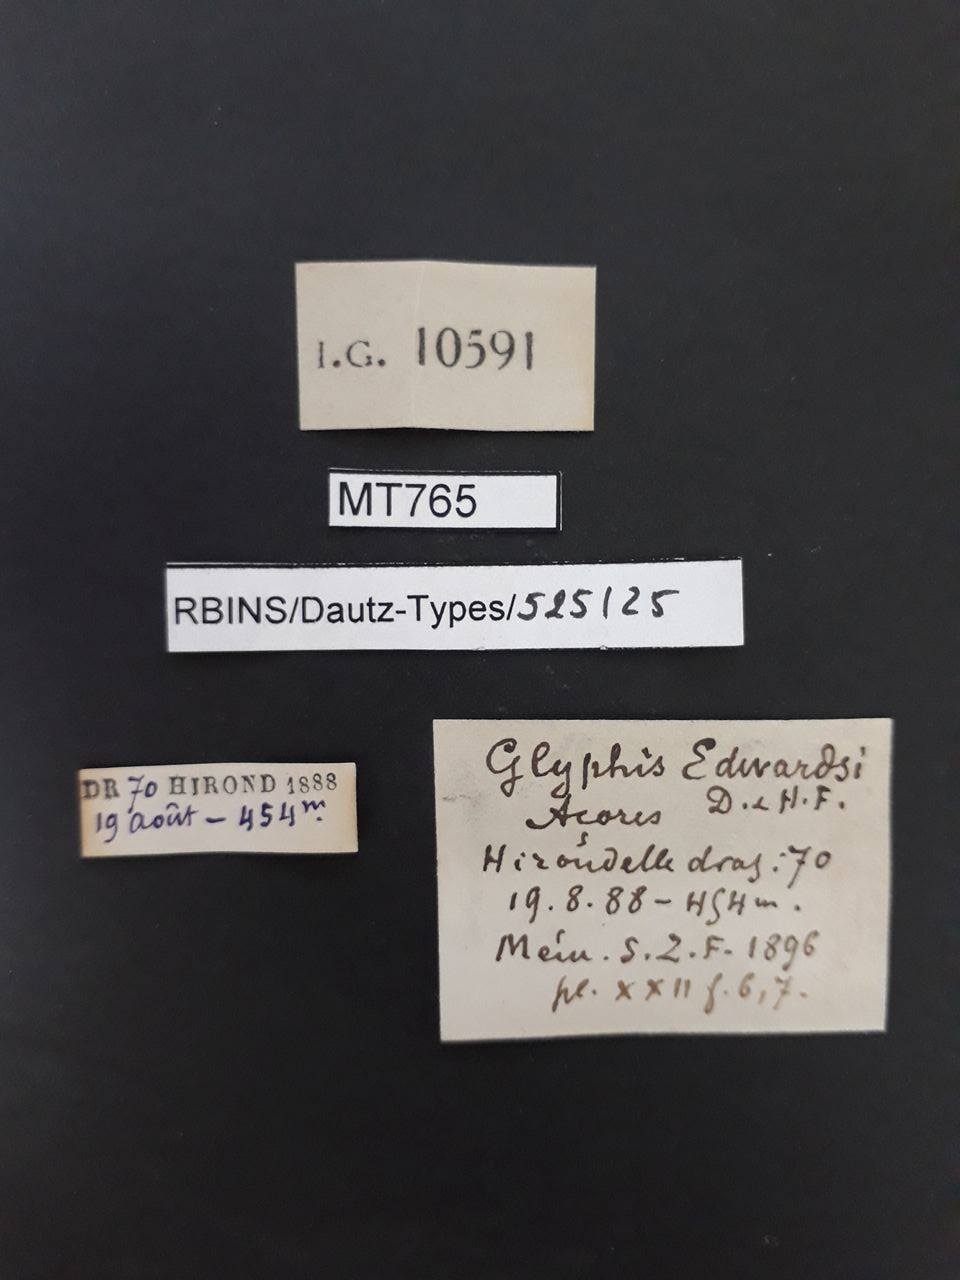 BE-RBINS-INV PARATYPE MT 765 Glyphis edwardsi LABELS.jpg